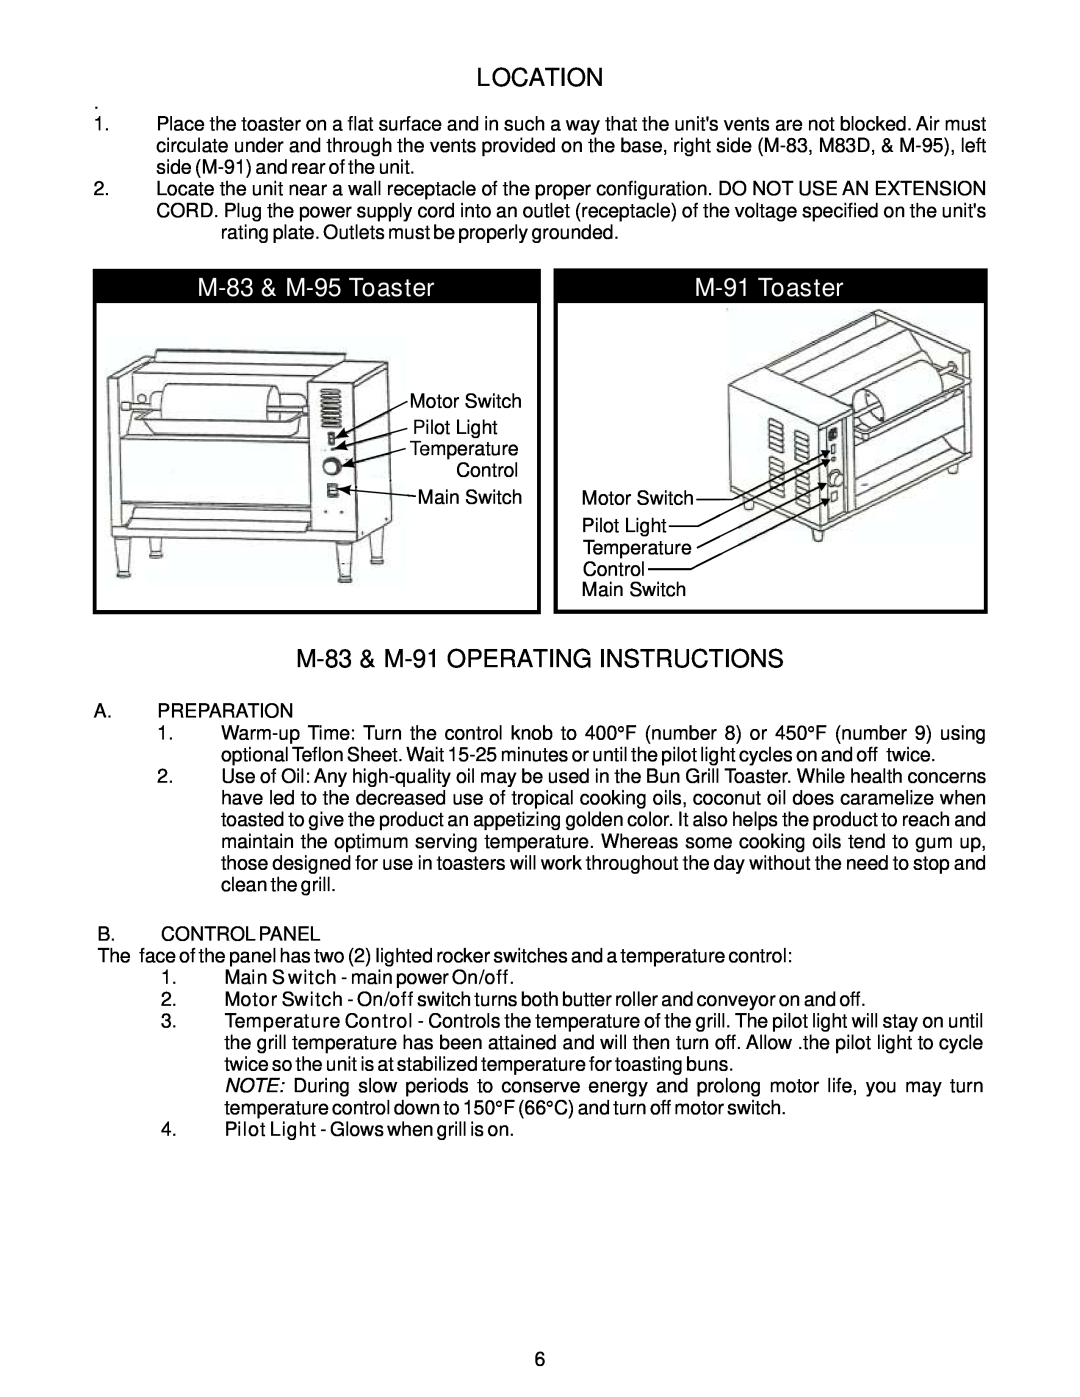 APW Wyott M Series, AT/BT Series manual Location, M-83 & M-95 Toaster, M-91 Toaster, M-83 & M-91 OPERATING INSTRUCTIONS 